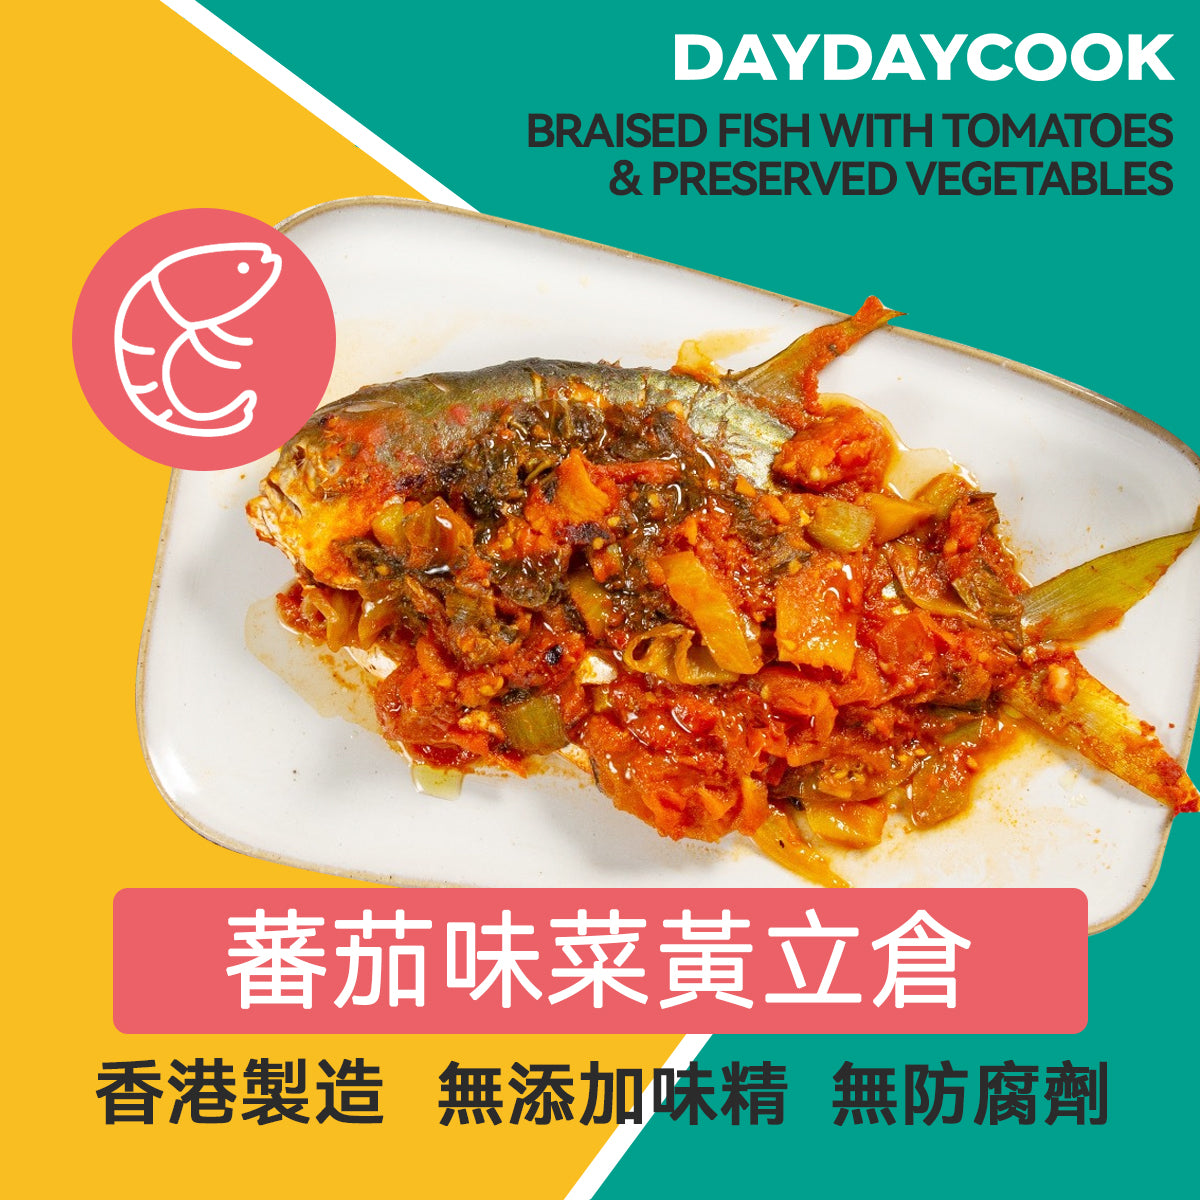 Braised fish with tomatoes and preserved vegetables